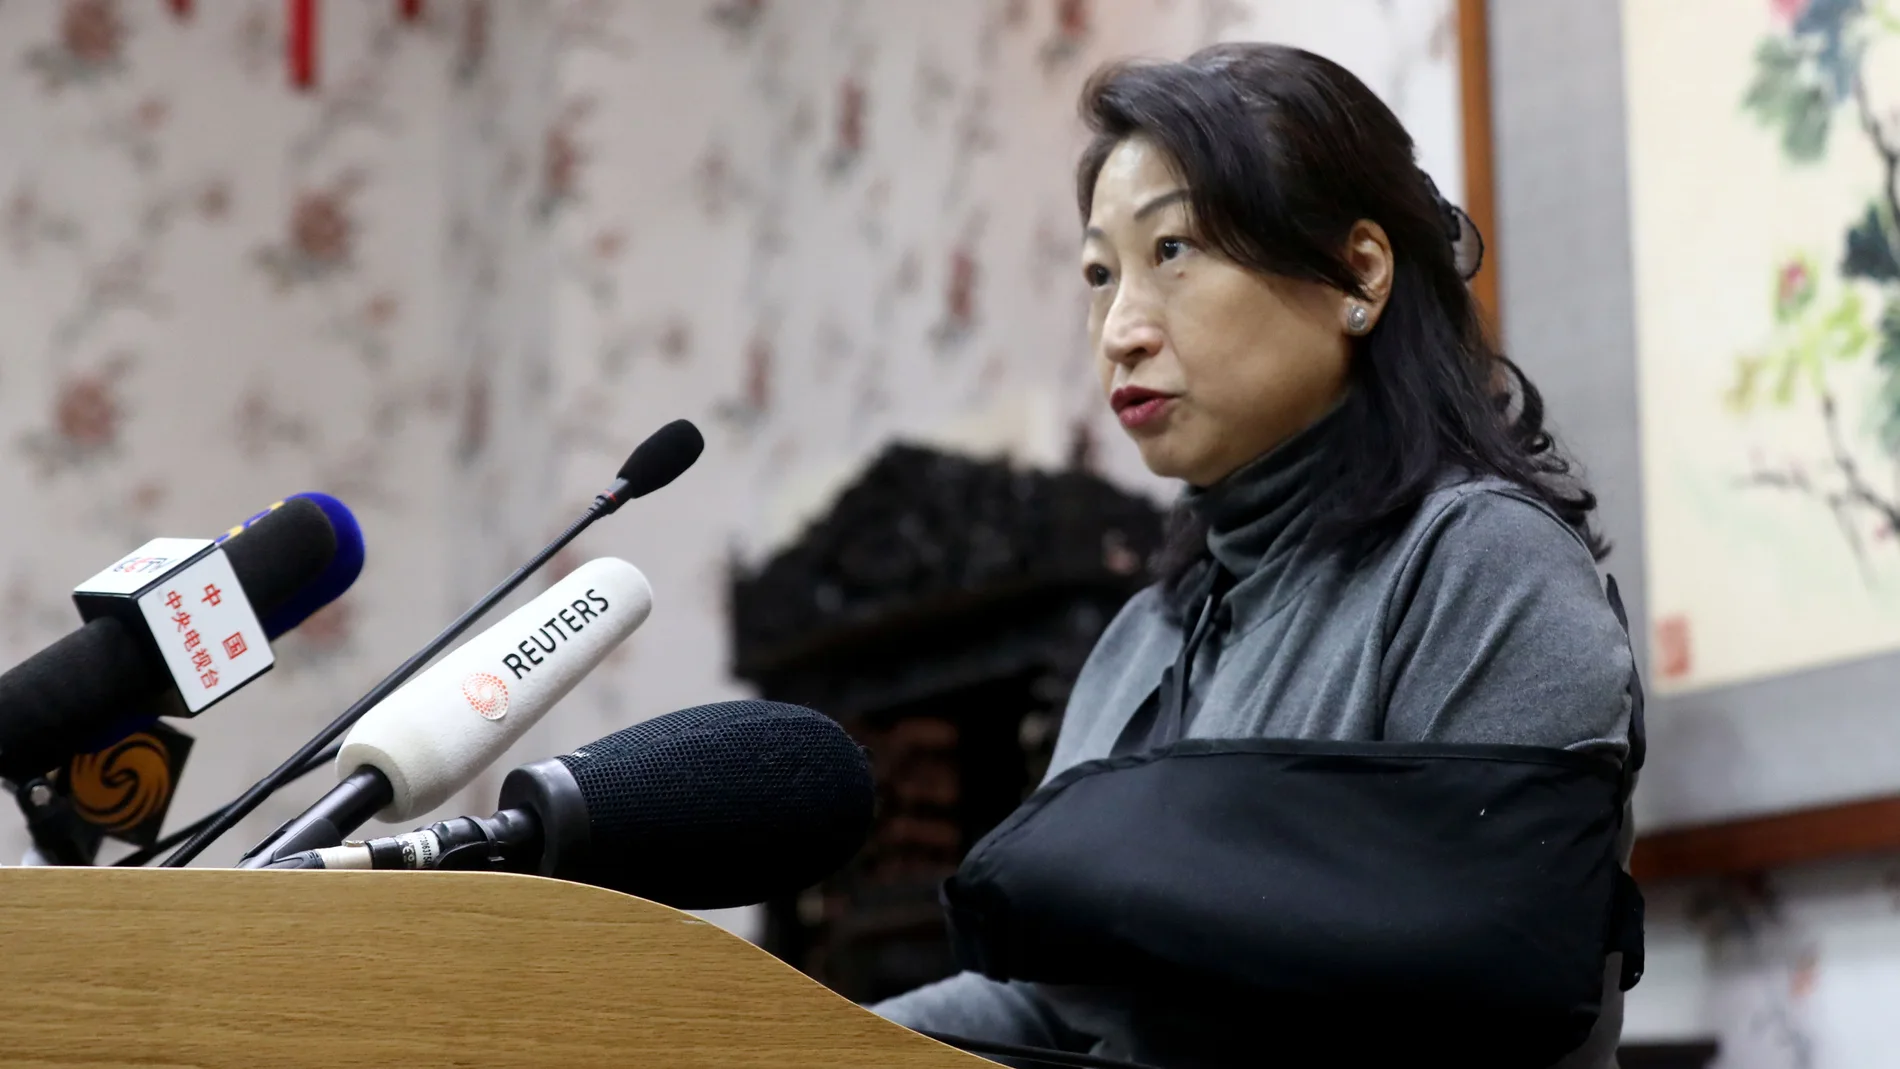 Hong Kong Secretary for Justice Teresa Cheng speaks during a news conference at the Chinese Embassy in London